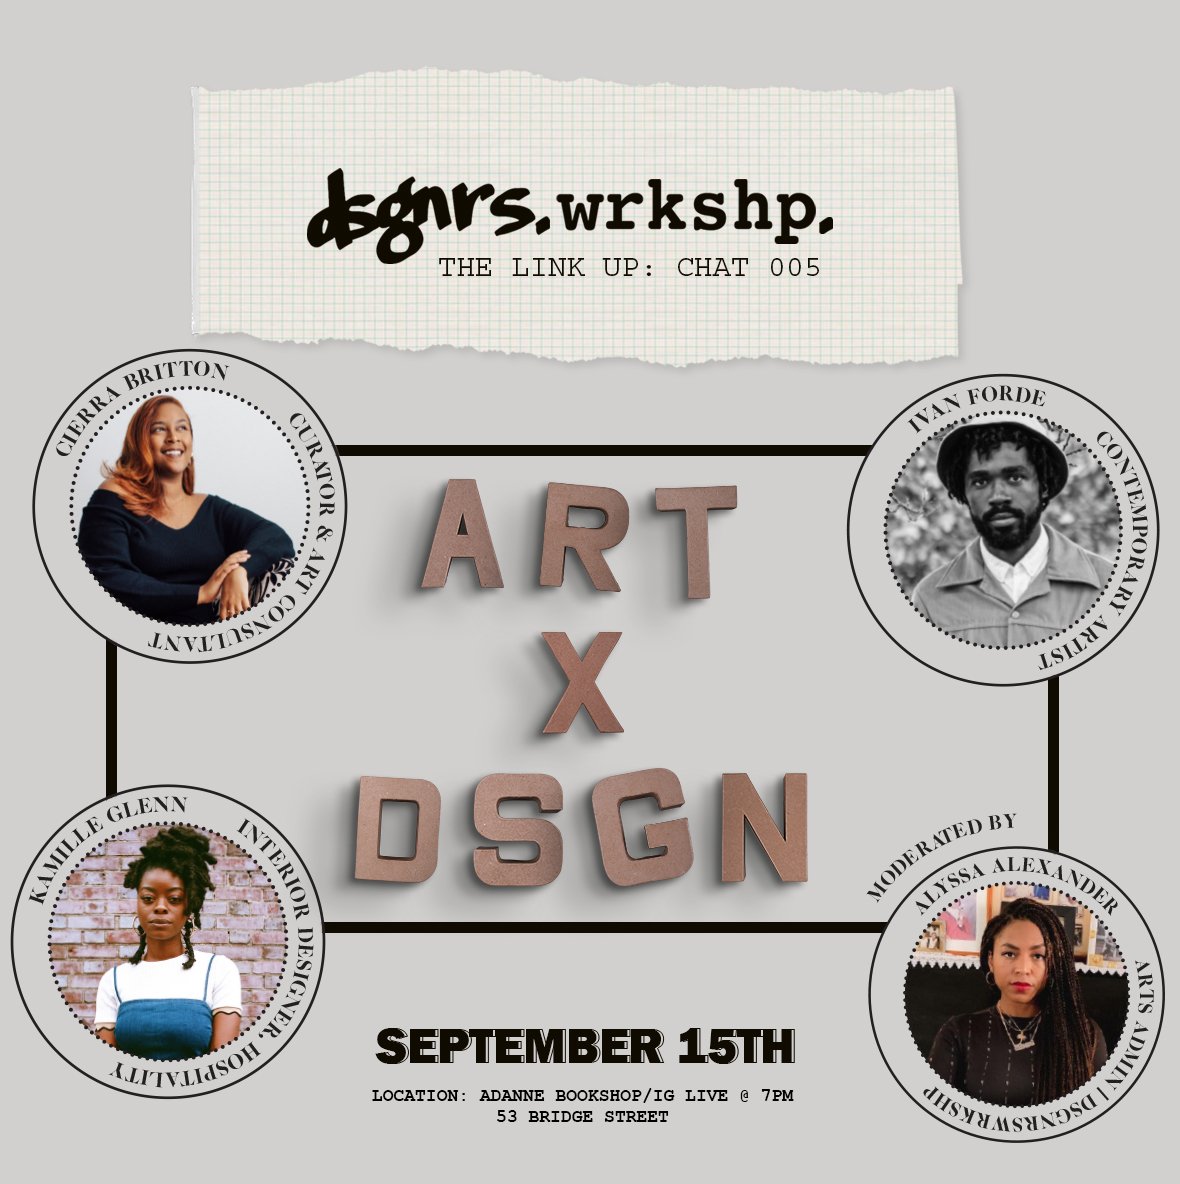  We chat art meets design, discussing the challenges of incorporating original art into projects, Black collectorship, the need for more representation of Black artists in public spaces and the mutually beneficial relationship between artists/galleri